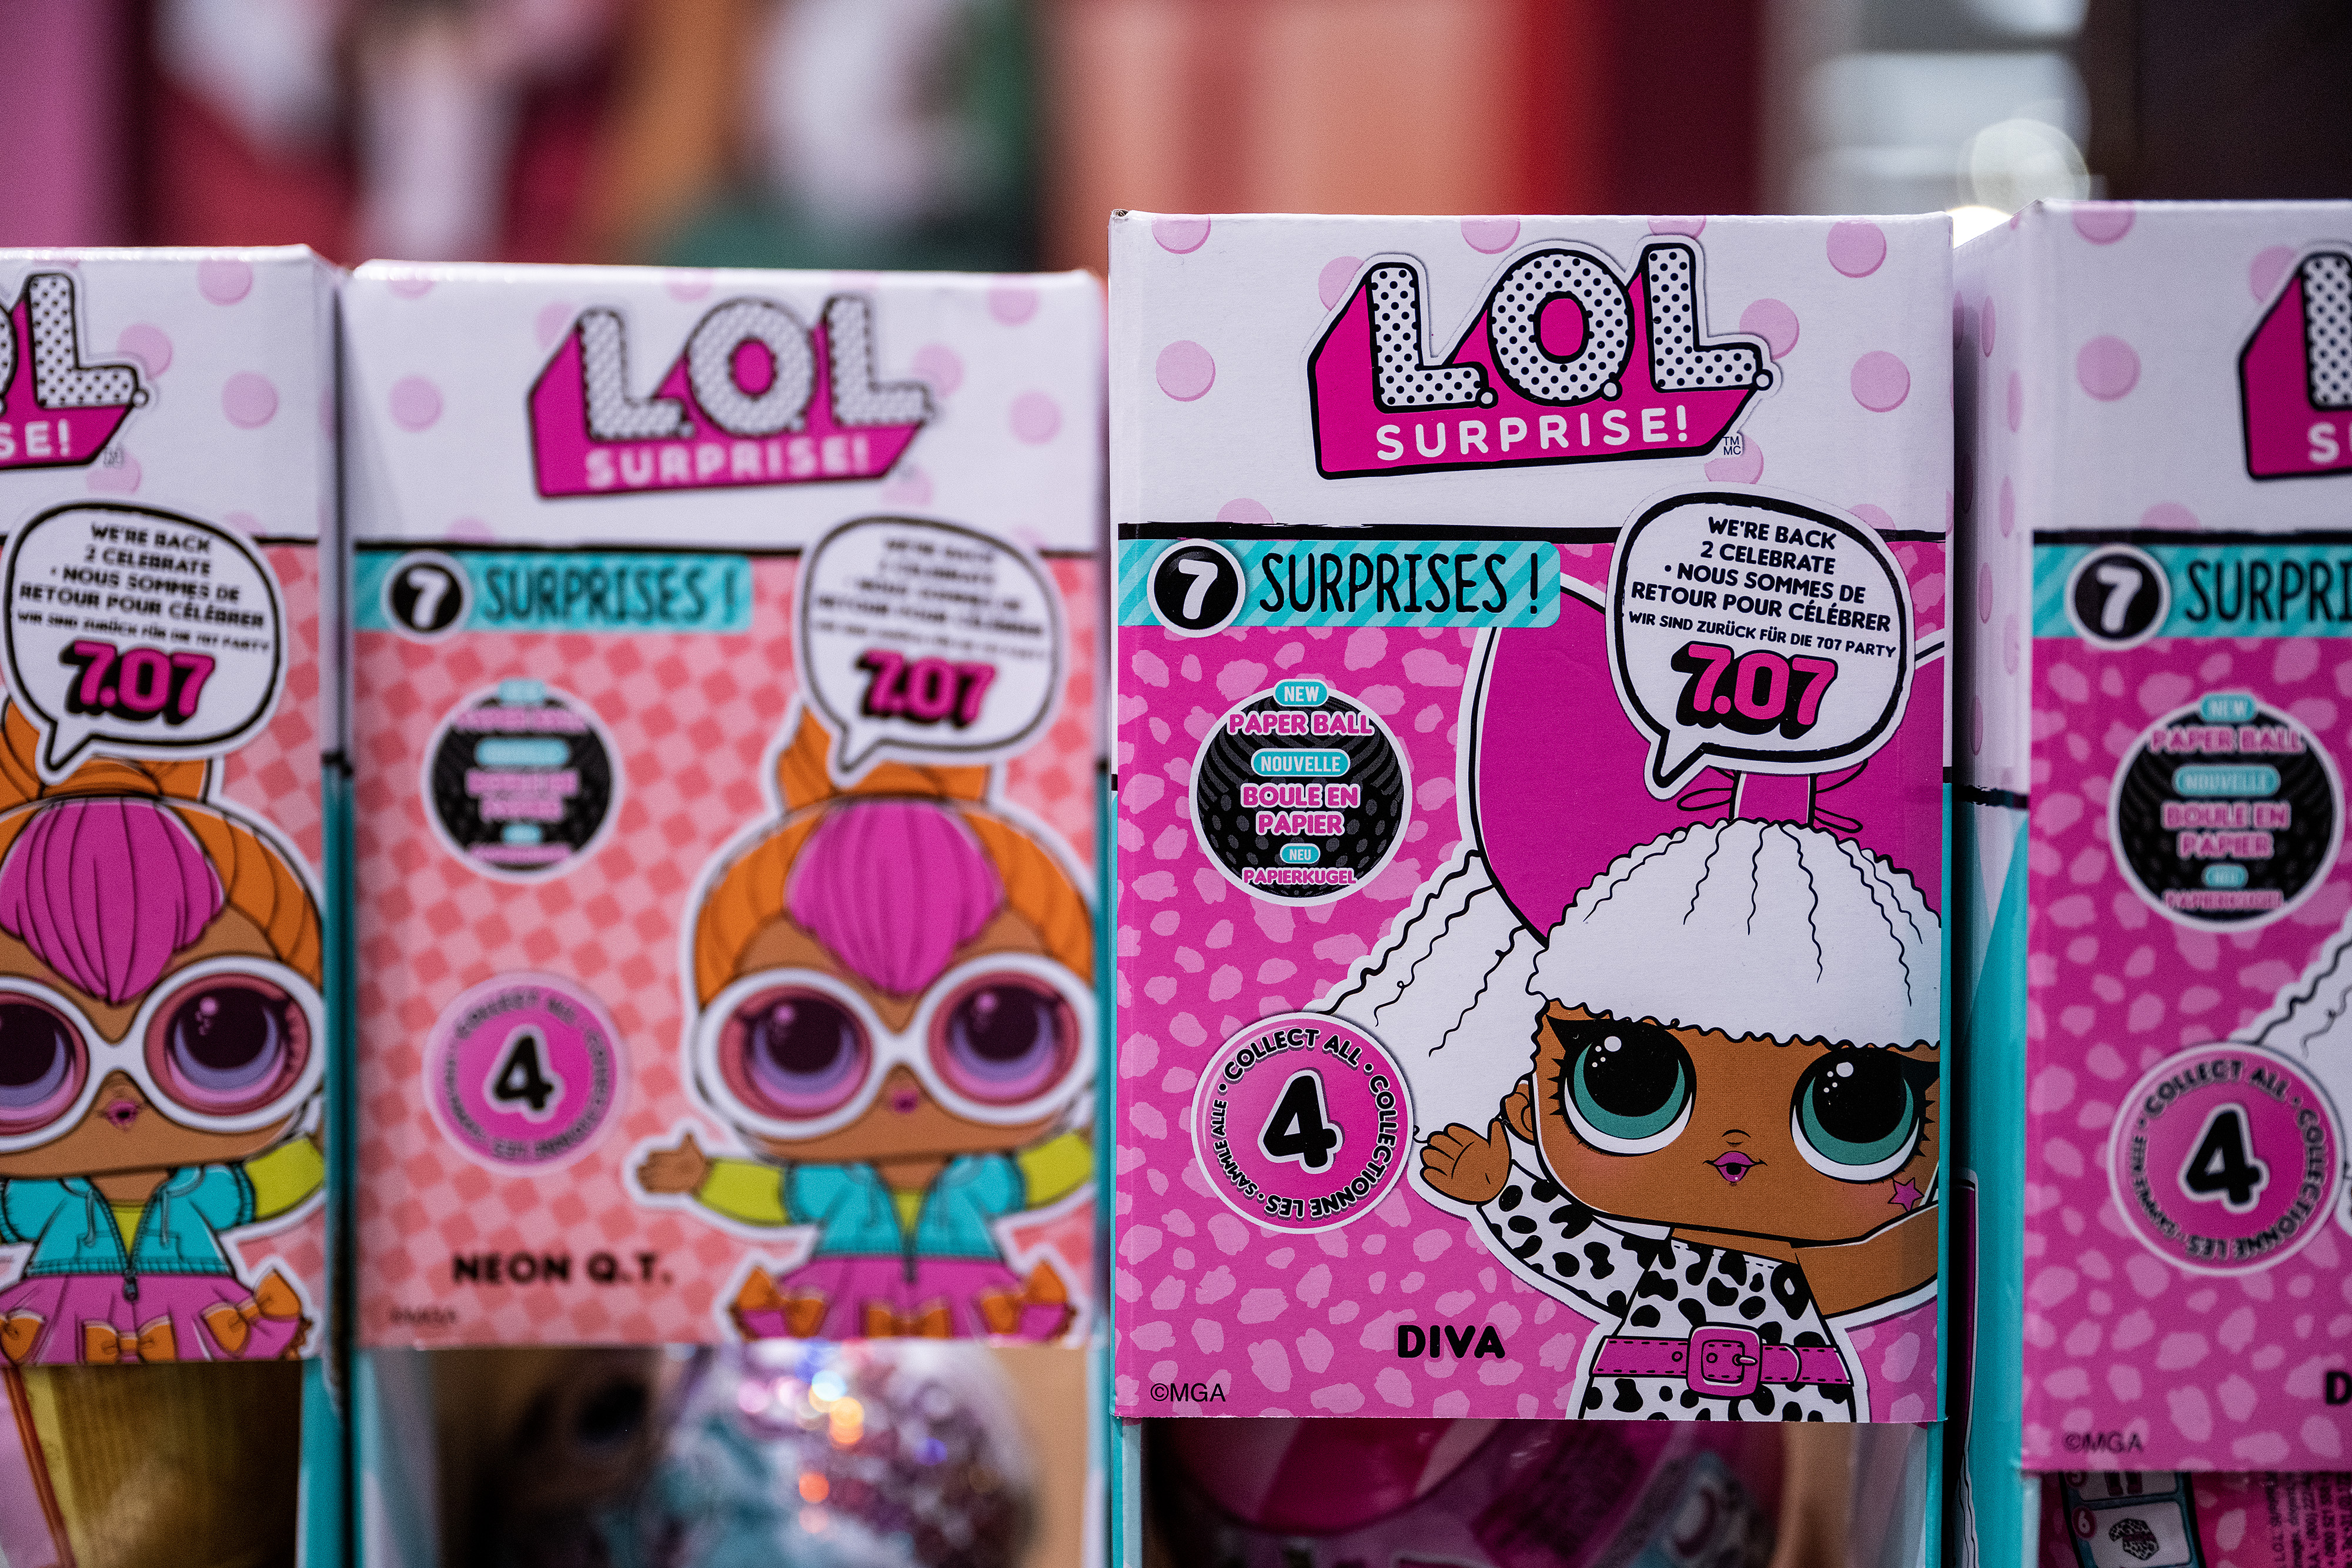 Artist Says L.O.L Surprise Doll Used Her Image Without Compensation